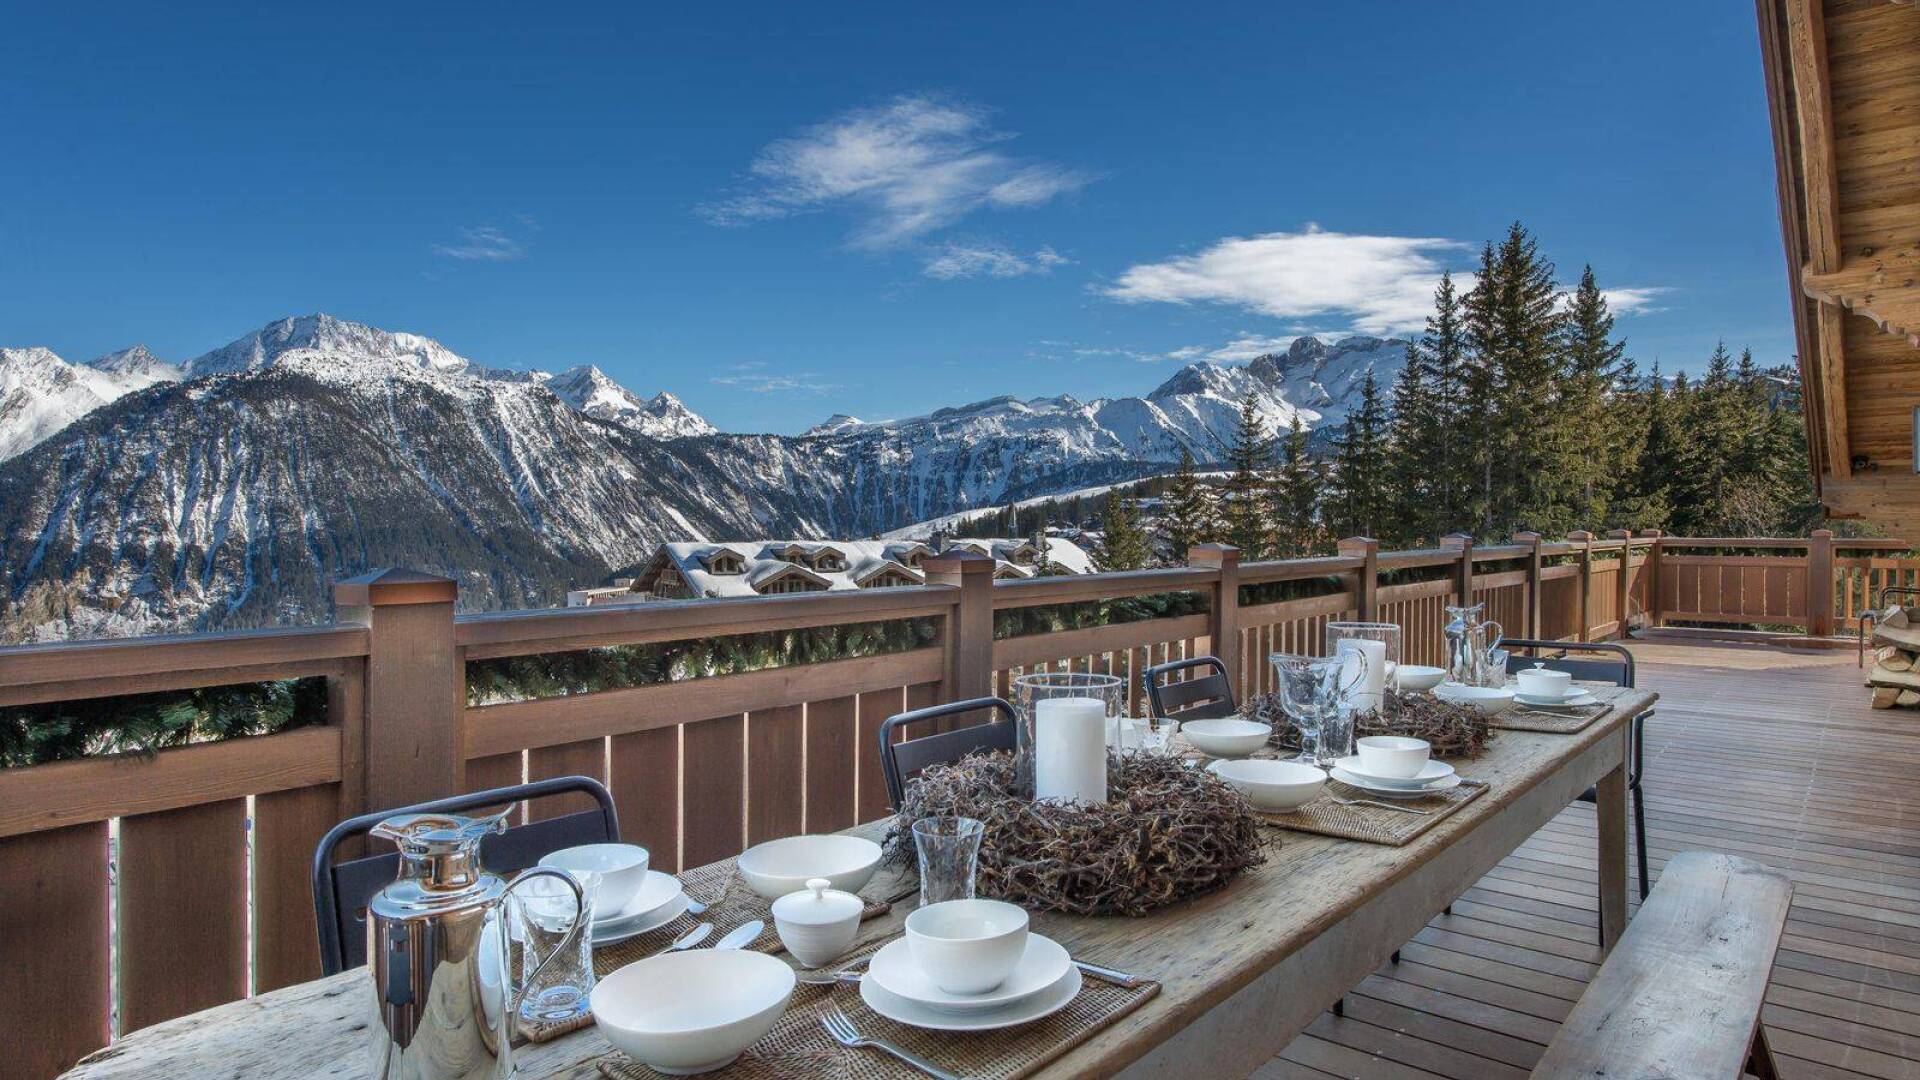 al fresco dining table with view over snowcapped French Alps